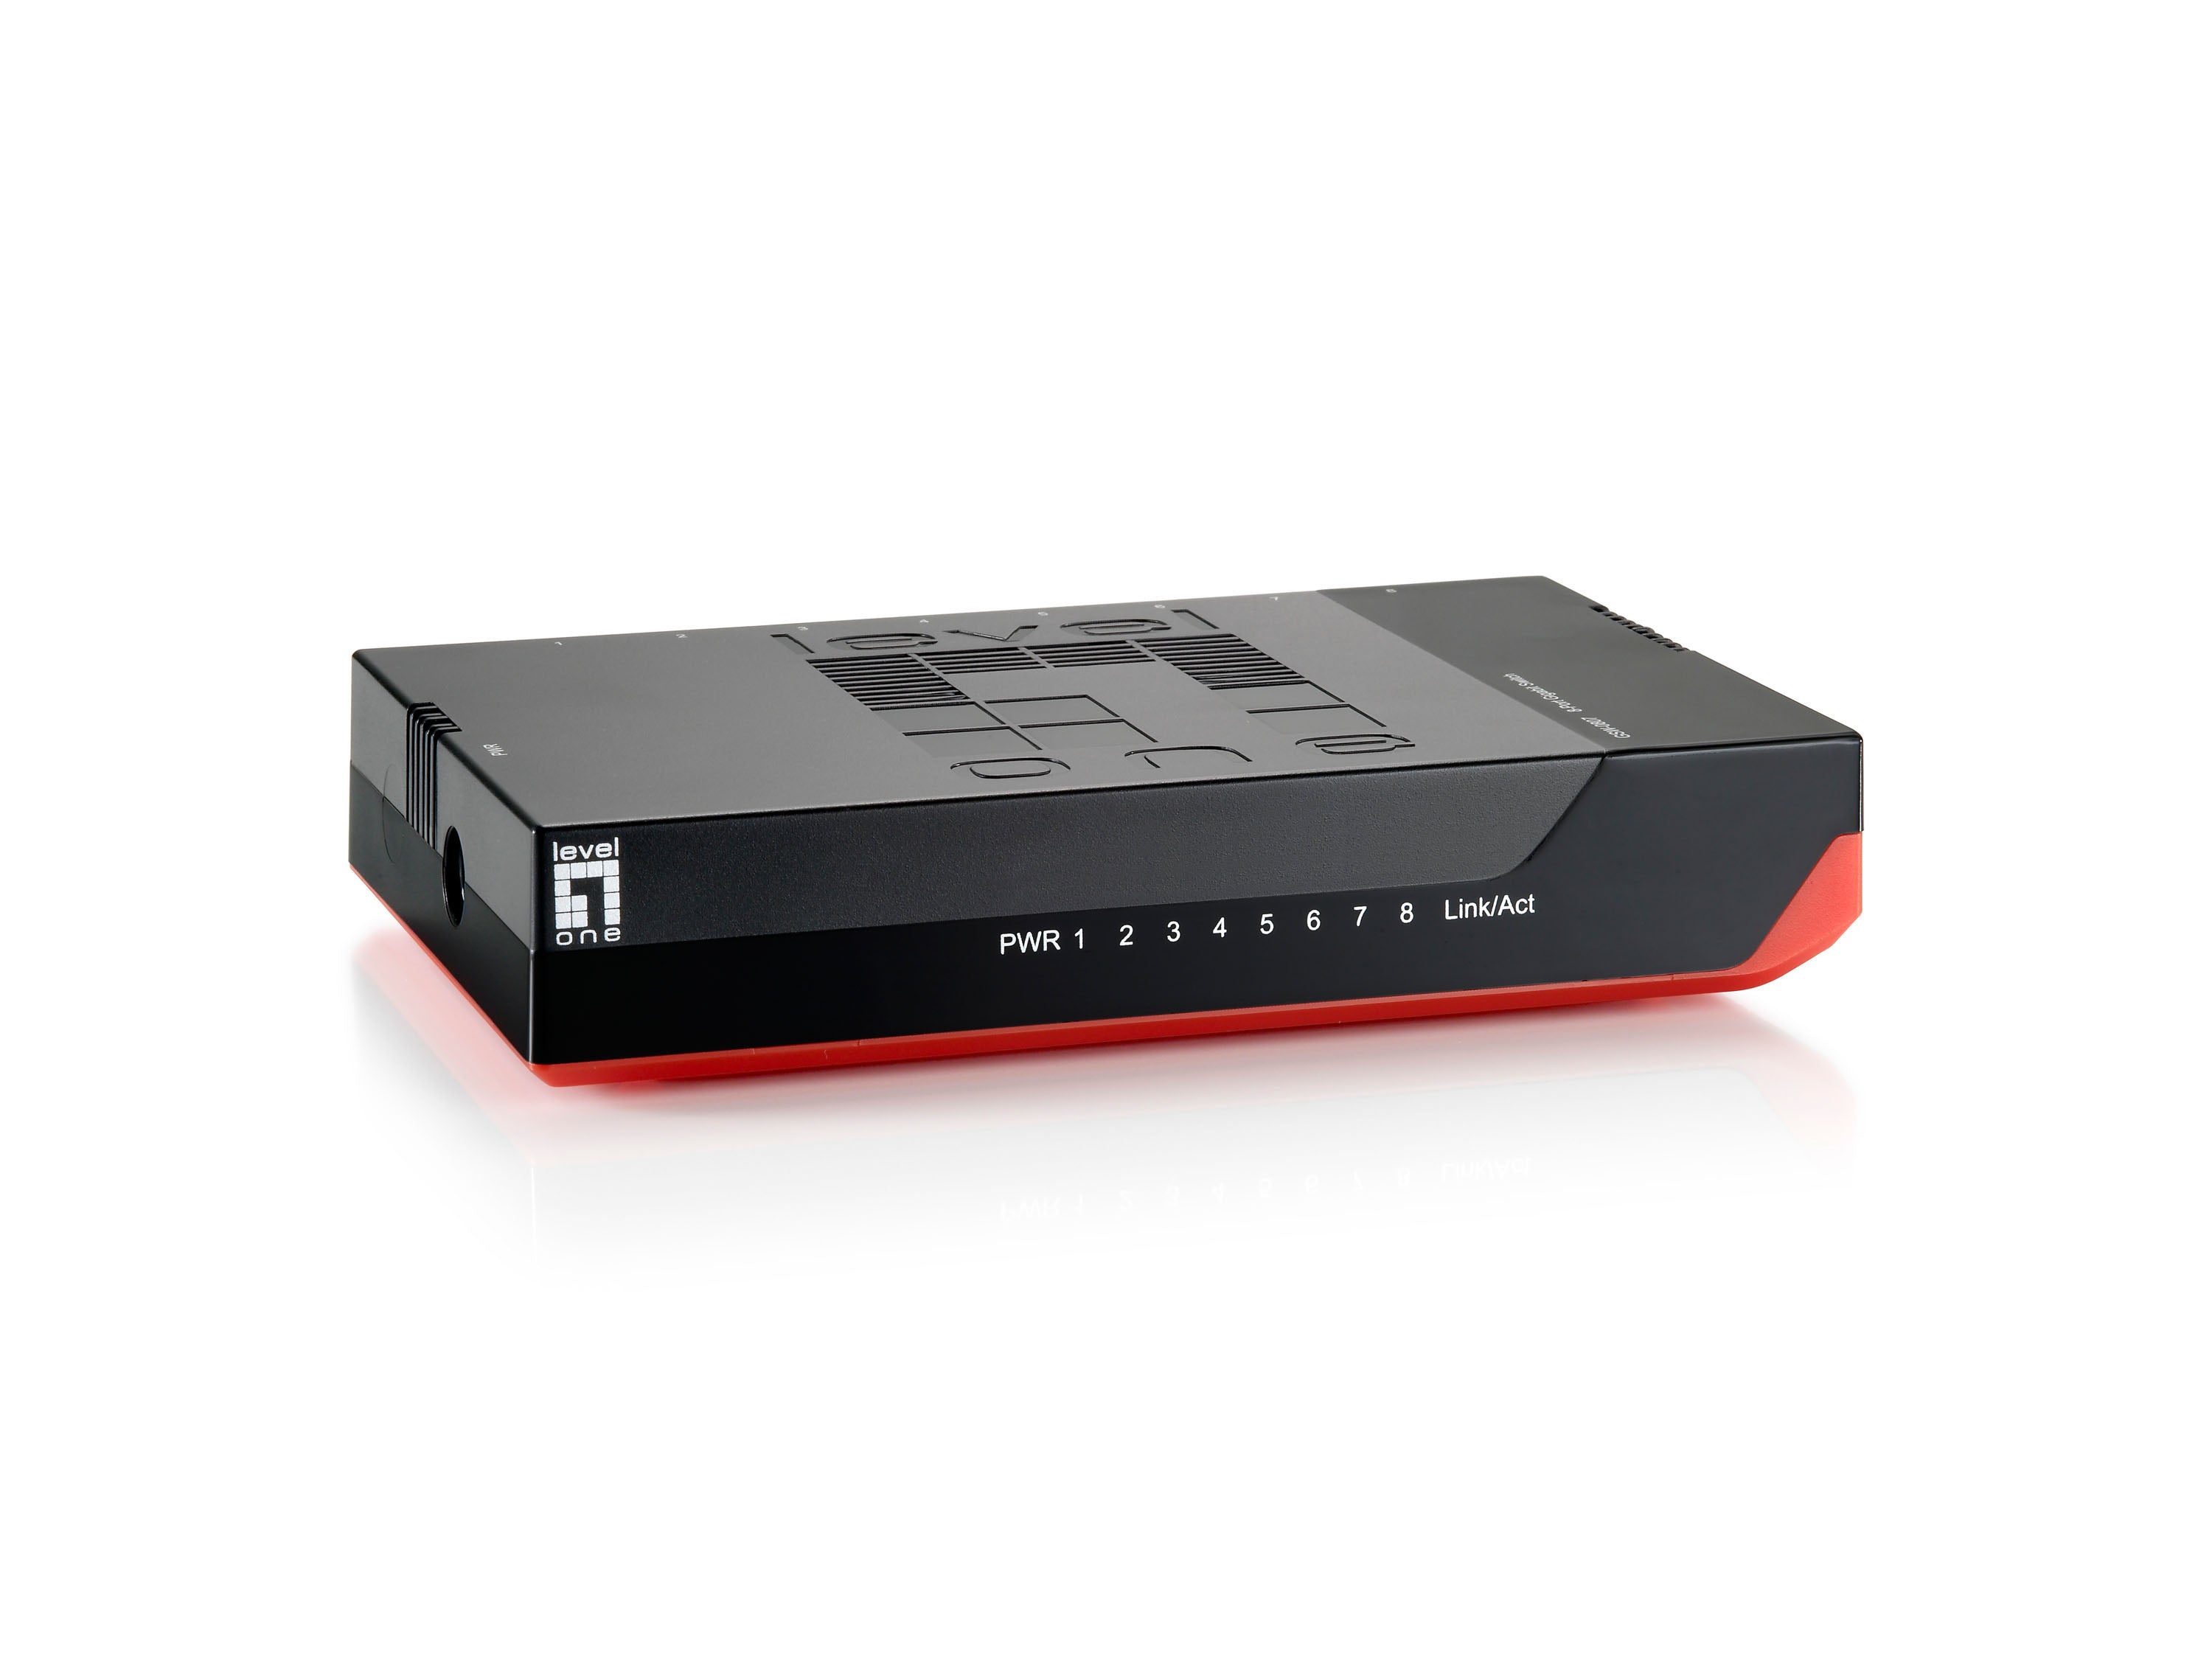 IGP-0310, 3-Port Industrial Gigabit PoE PSE/PD Switch,802.3at PoE, 30W -  LevelOne